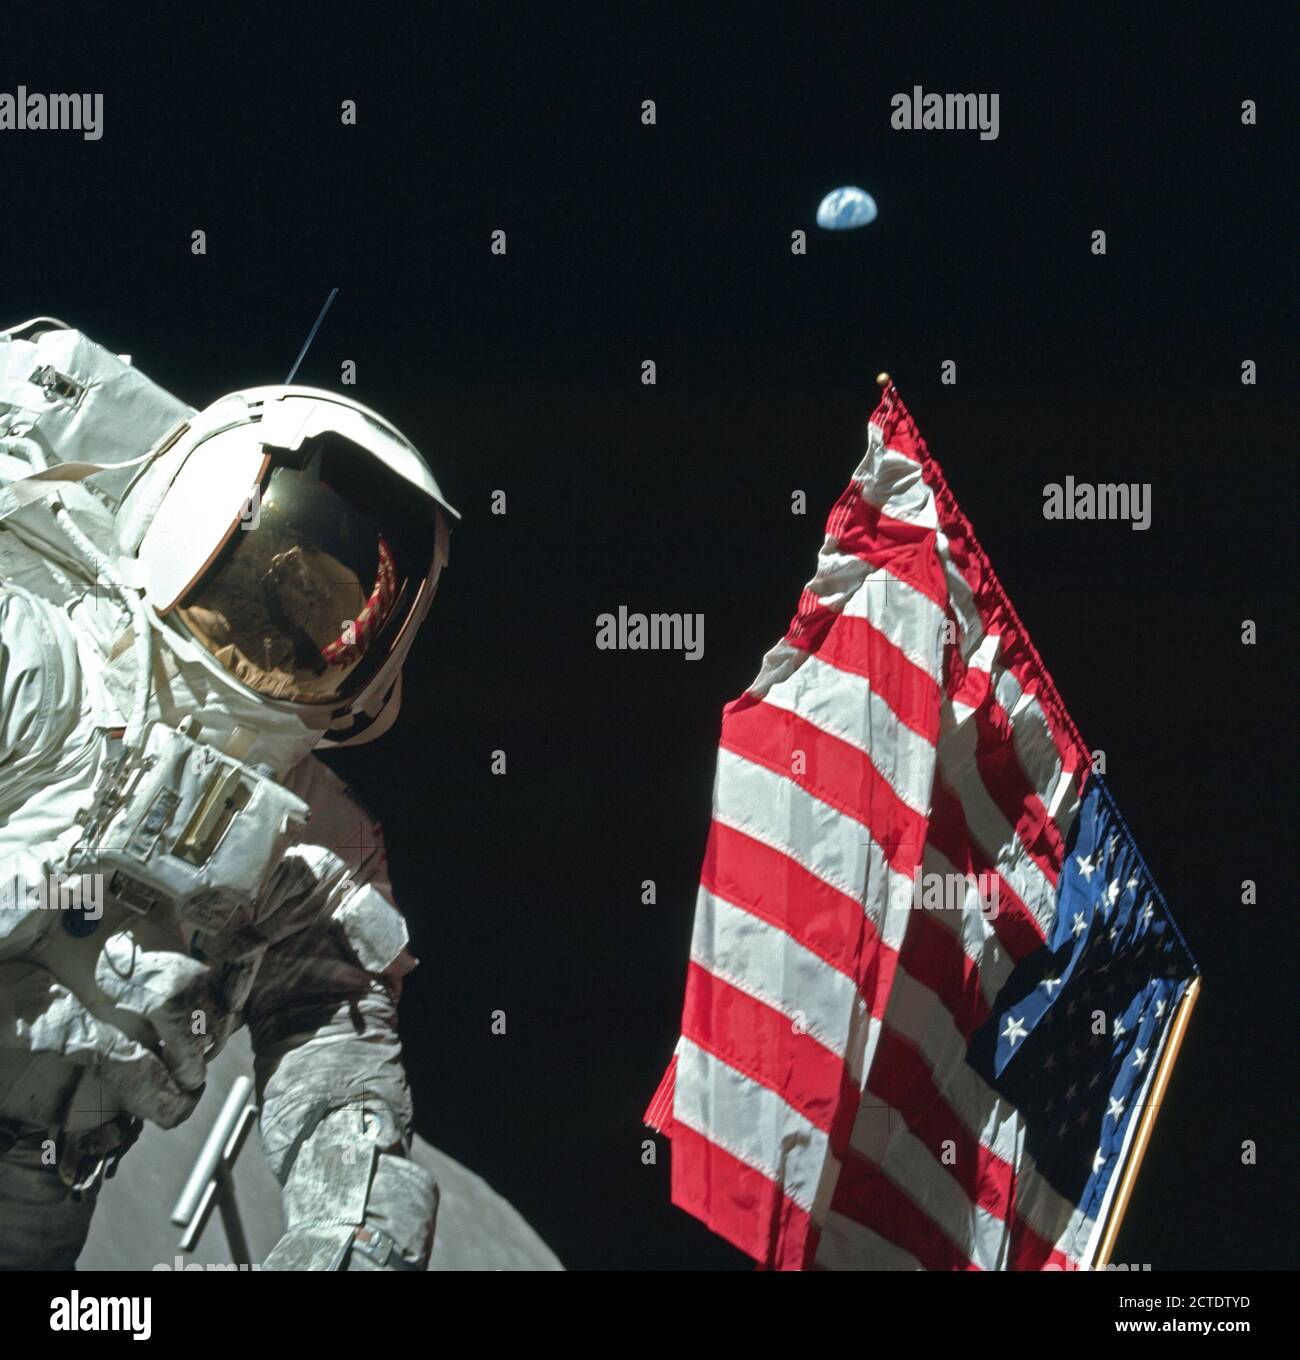 Astronaut Harrison Schmitt poses on the Lunar surface next to an American flag during Apollo 17. (moon surface seen on bottom of image) Stock Photo